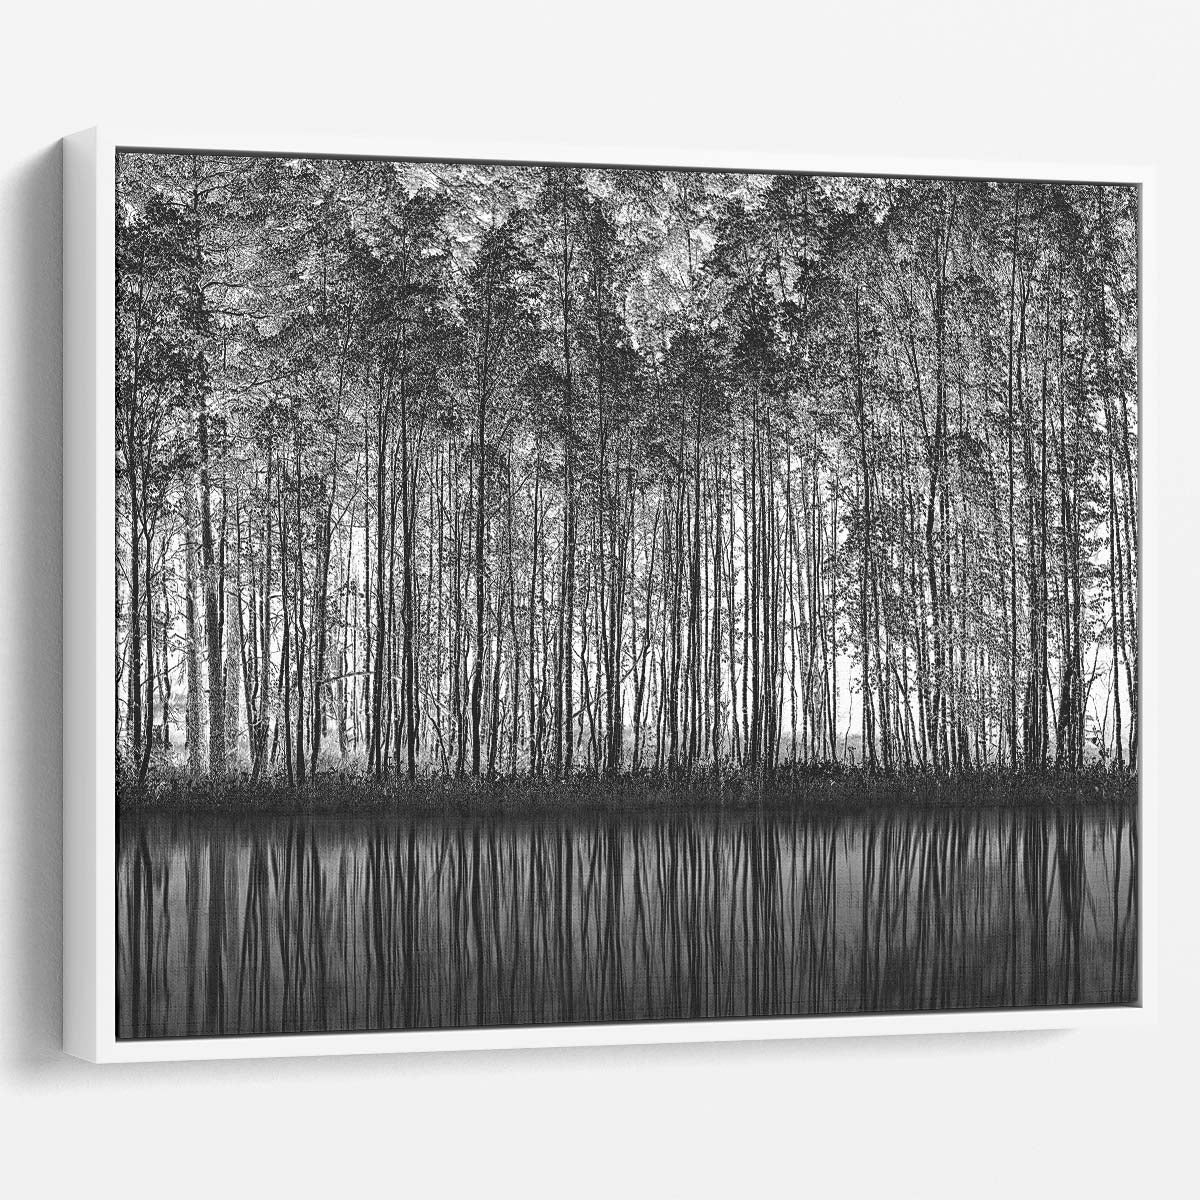 Serene Monochrome Forest Reflection Landscape Wall Art by Luxuriance Designs. Made in USA.